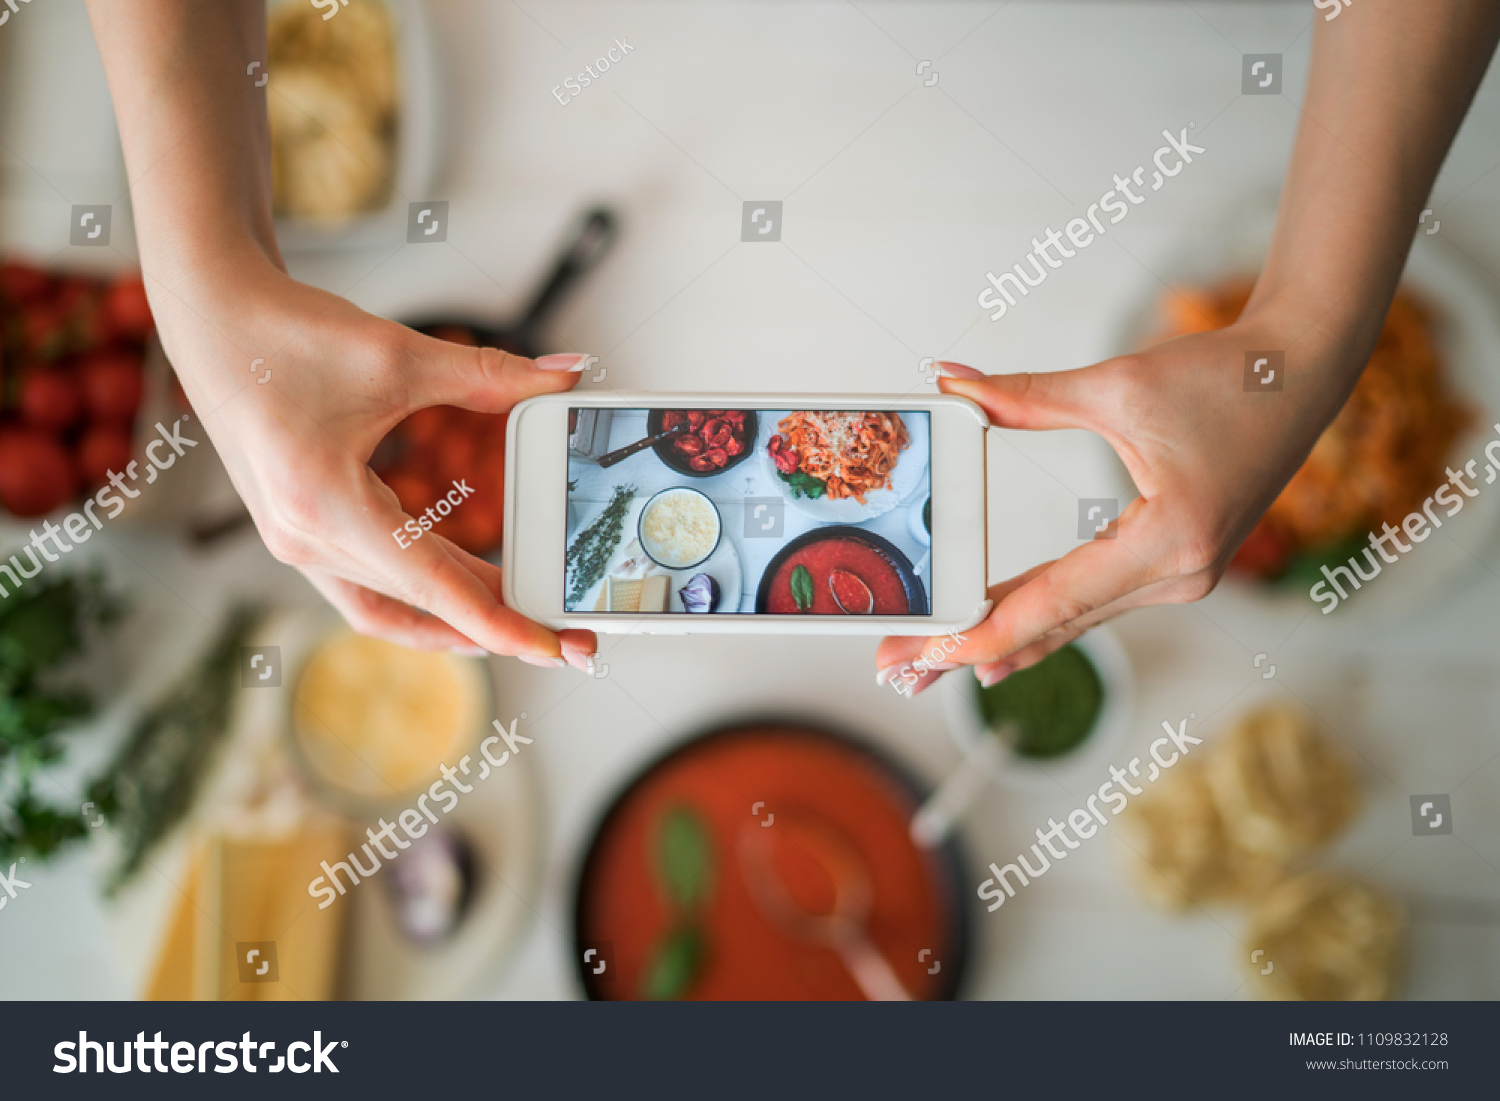 Hands with the smart phone pictures of meal. Young woman, cooking blogger is cooking at the home kitchen in sunny day and is making photo at smartphone. Instagram food blogger workshop concept. #1109832128